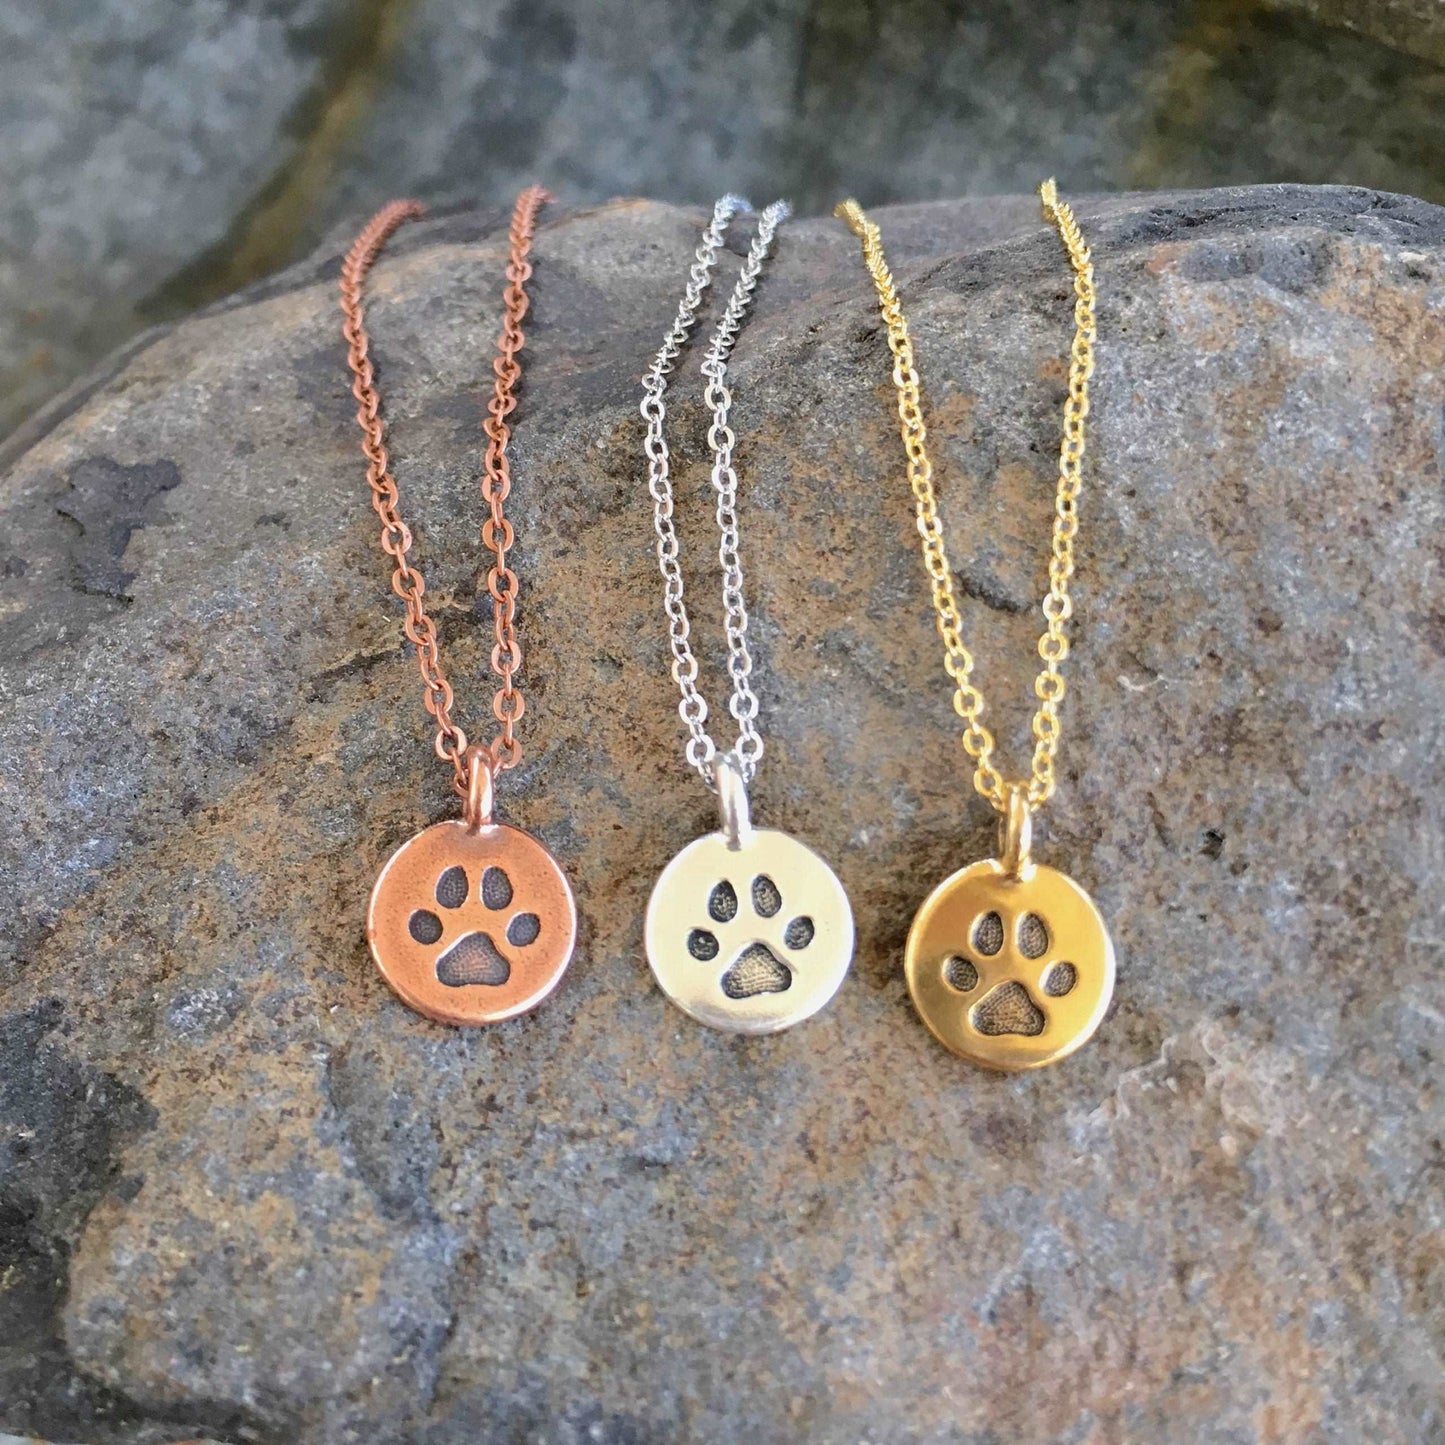 Paw Print Necklace - silver, copper, gold - dog jewelry